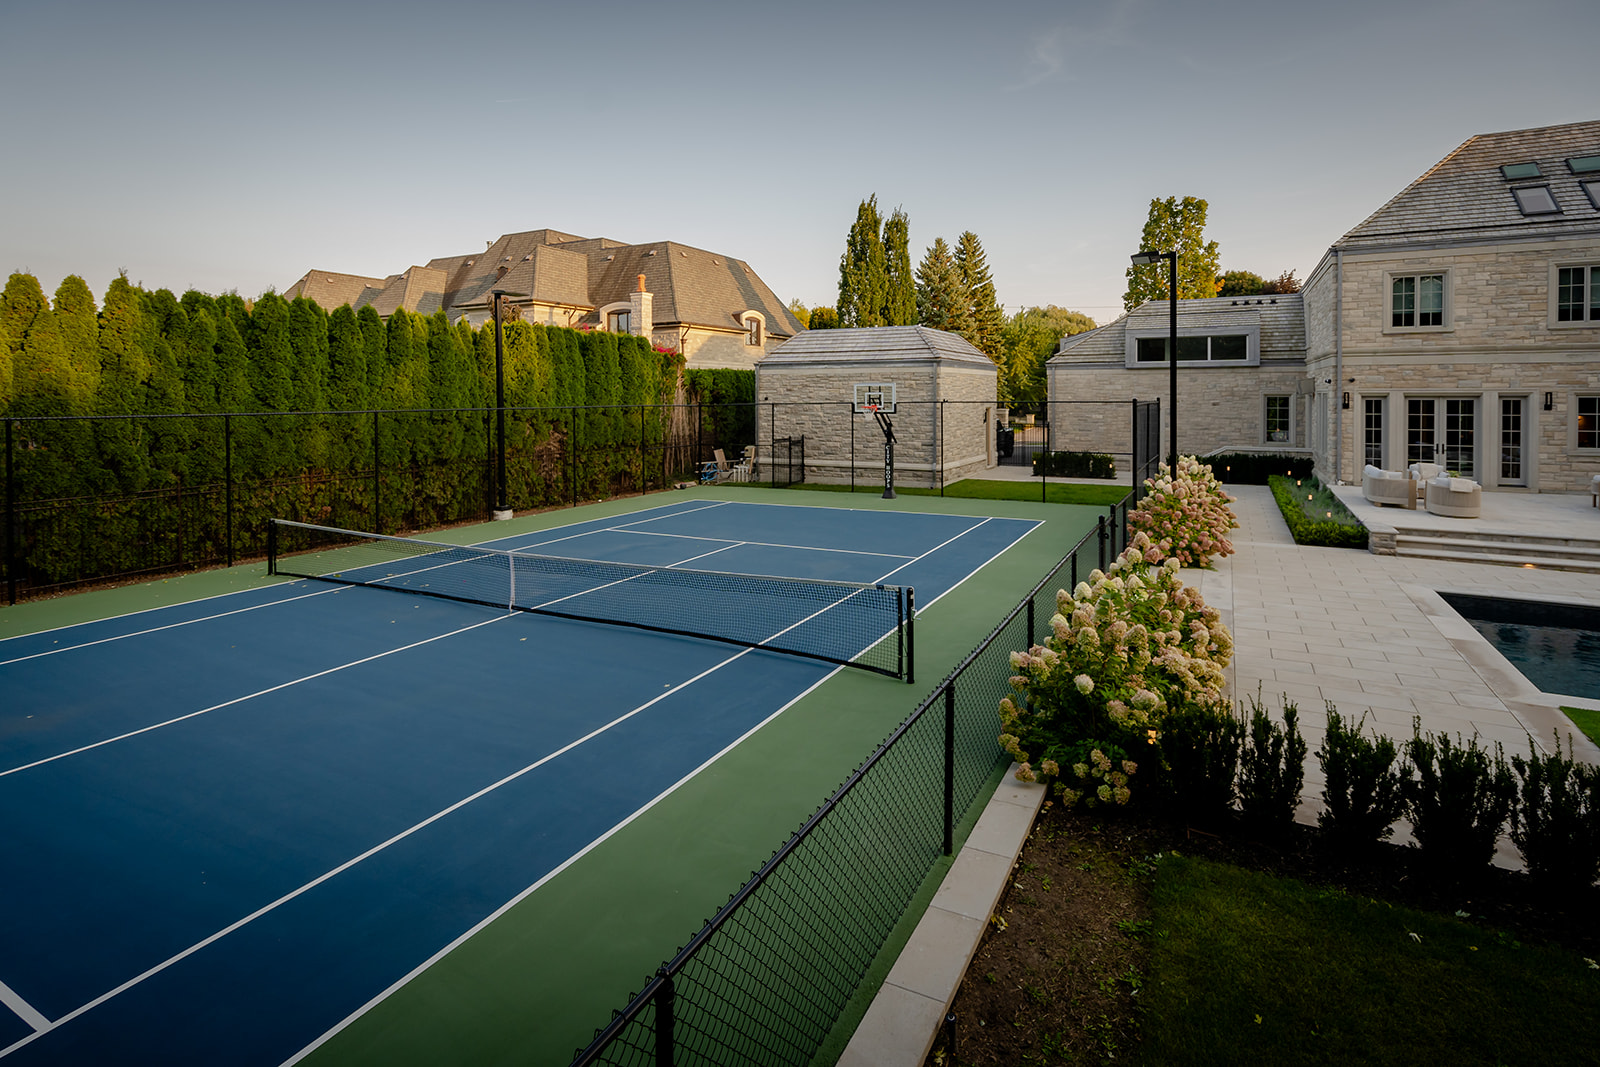 A large tennis court on the left with the house on the right.